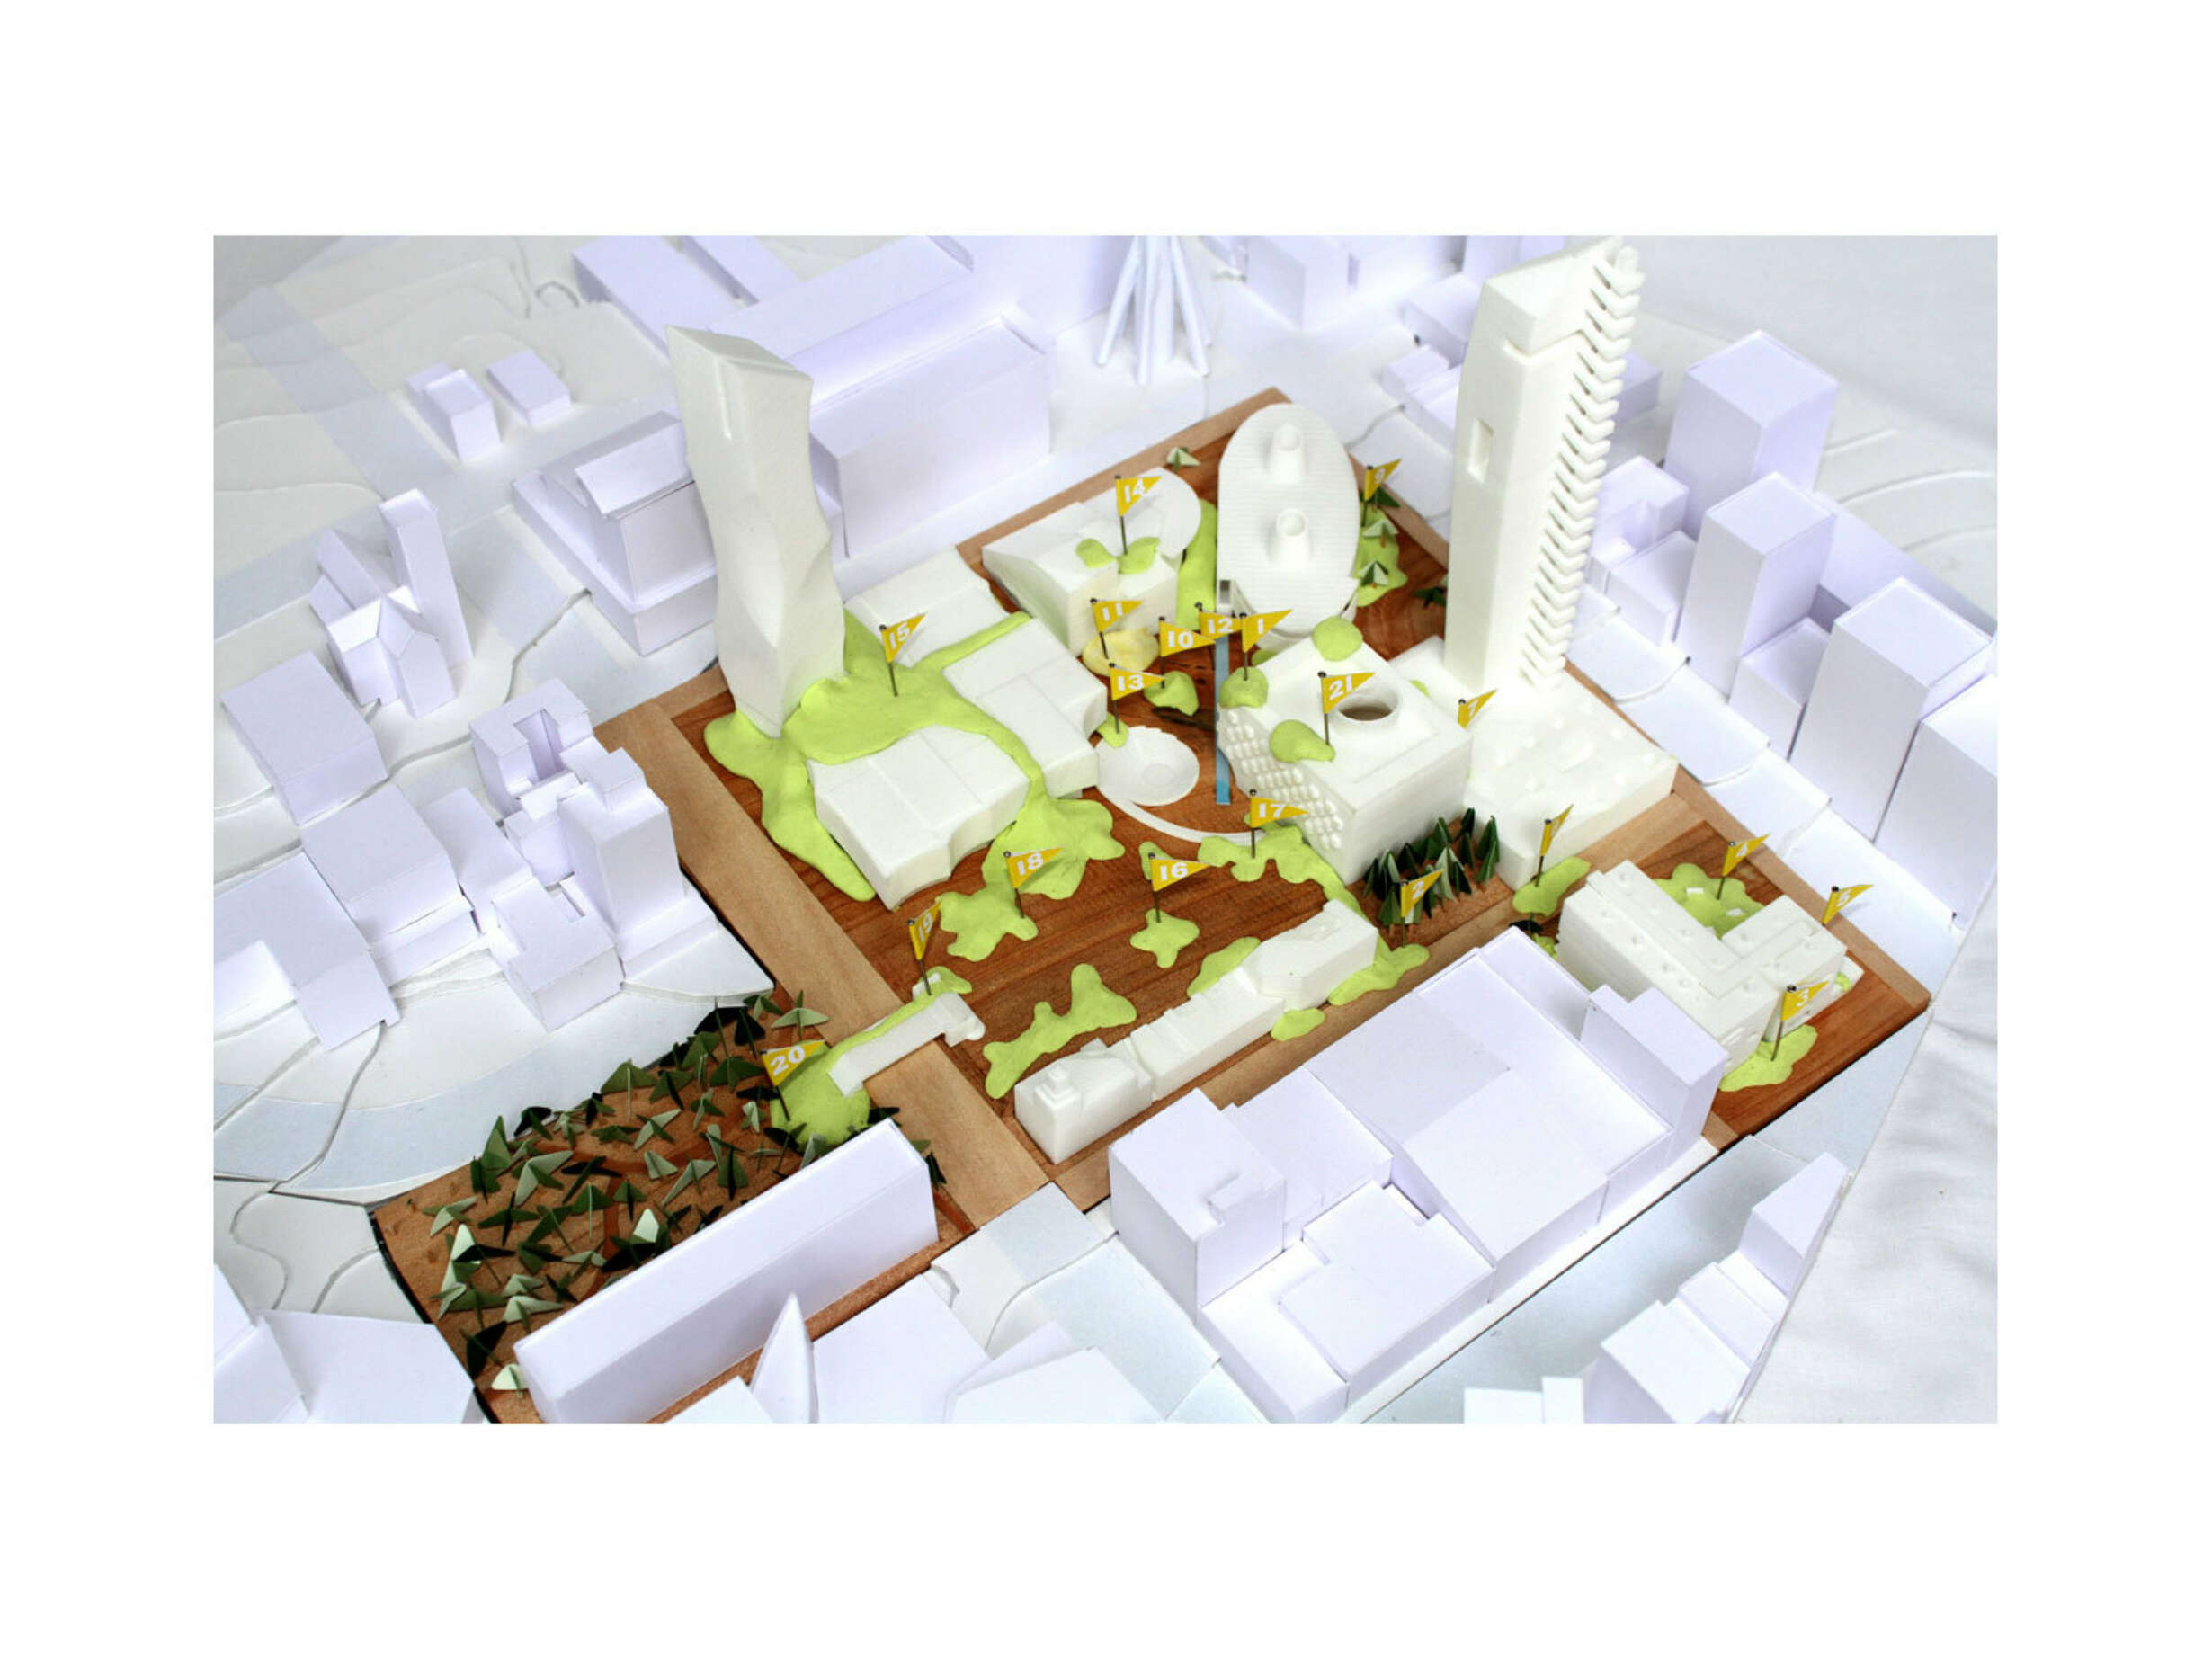 The final model illustrates the formal arrangement of the site and the all-consuming 'Village Green'